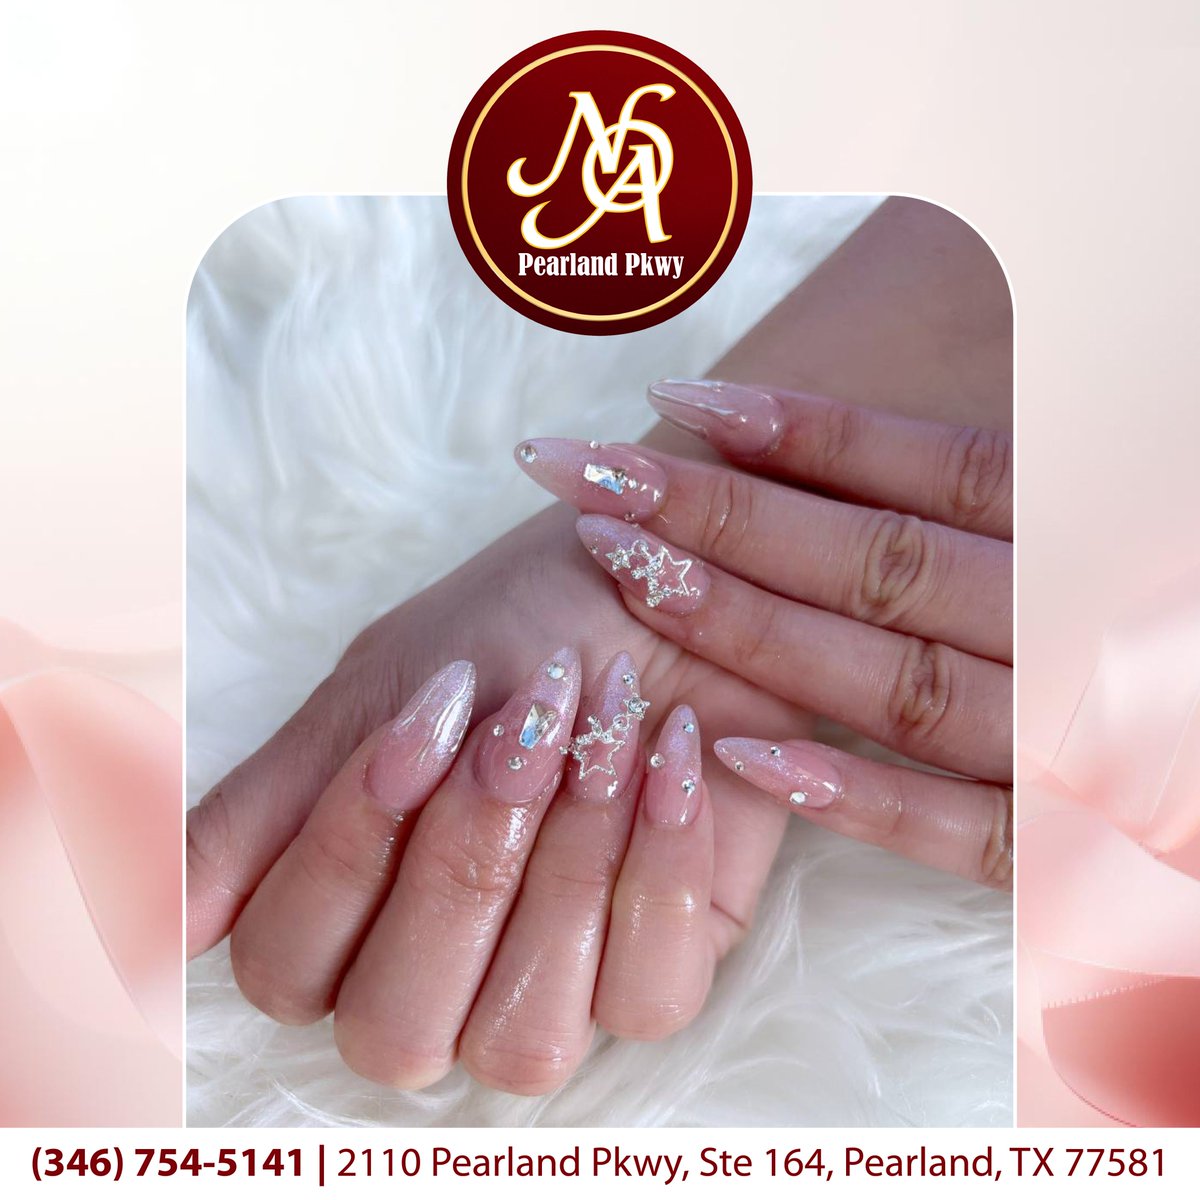 Sparkles, stars, and pastels - this mani is all about the girly essentials! ✨

#nailsofamerica #nailsofamericapearland #nailsalonspearland #manicure #pedicure #spapearland #nailpolish #naillover #nailworld #NailStyle #nailfashion